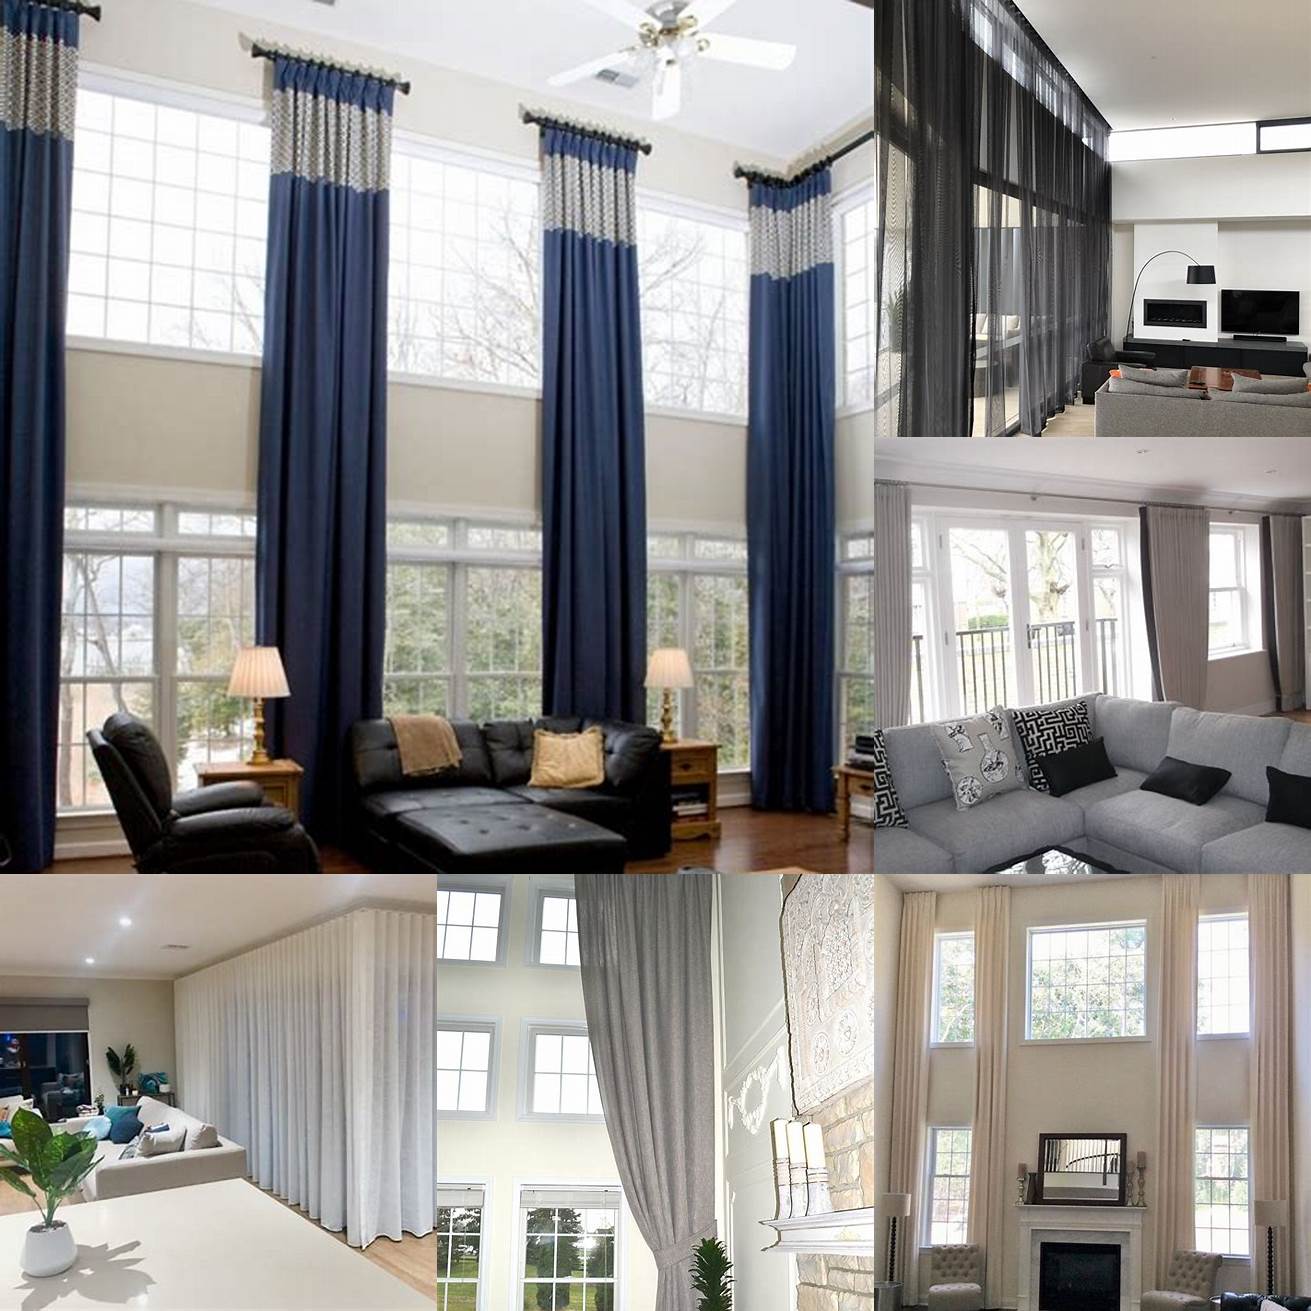 2 Floor-to-ceiling drapes